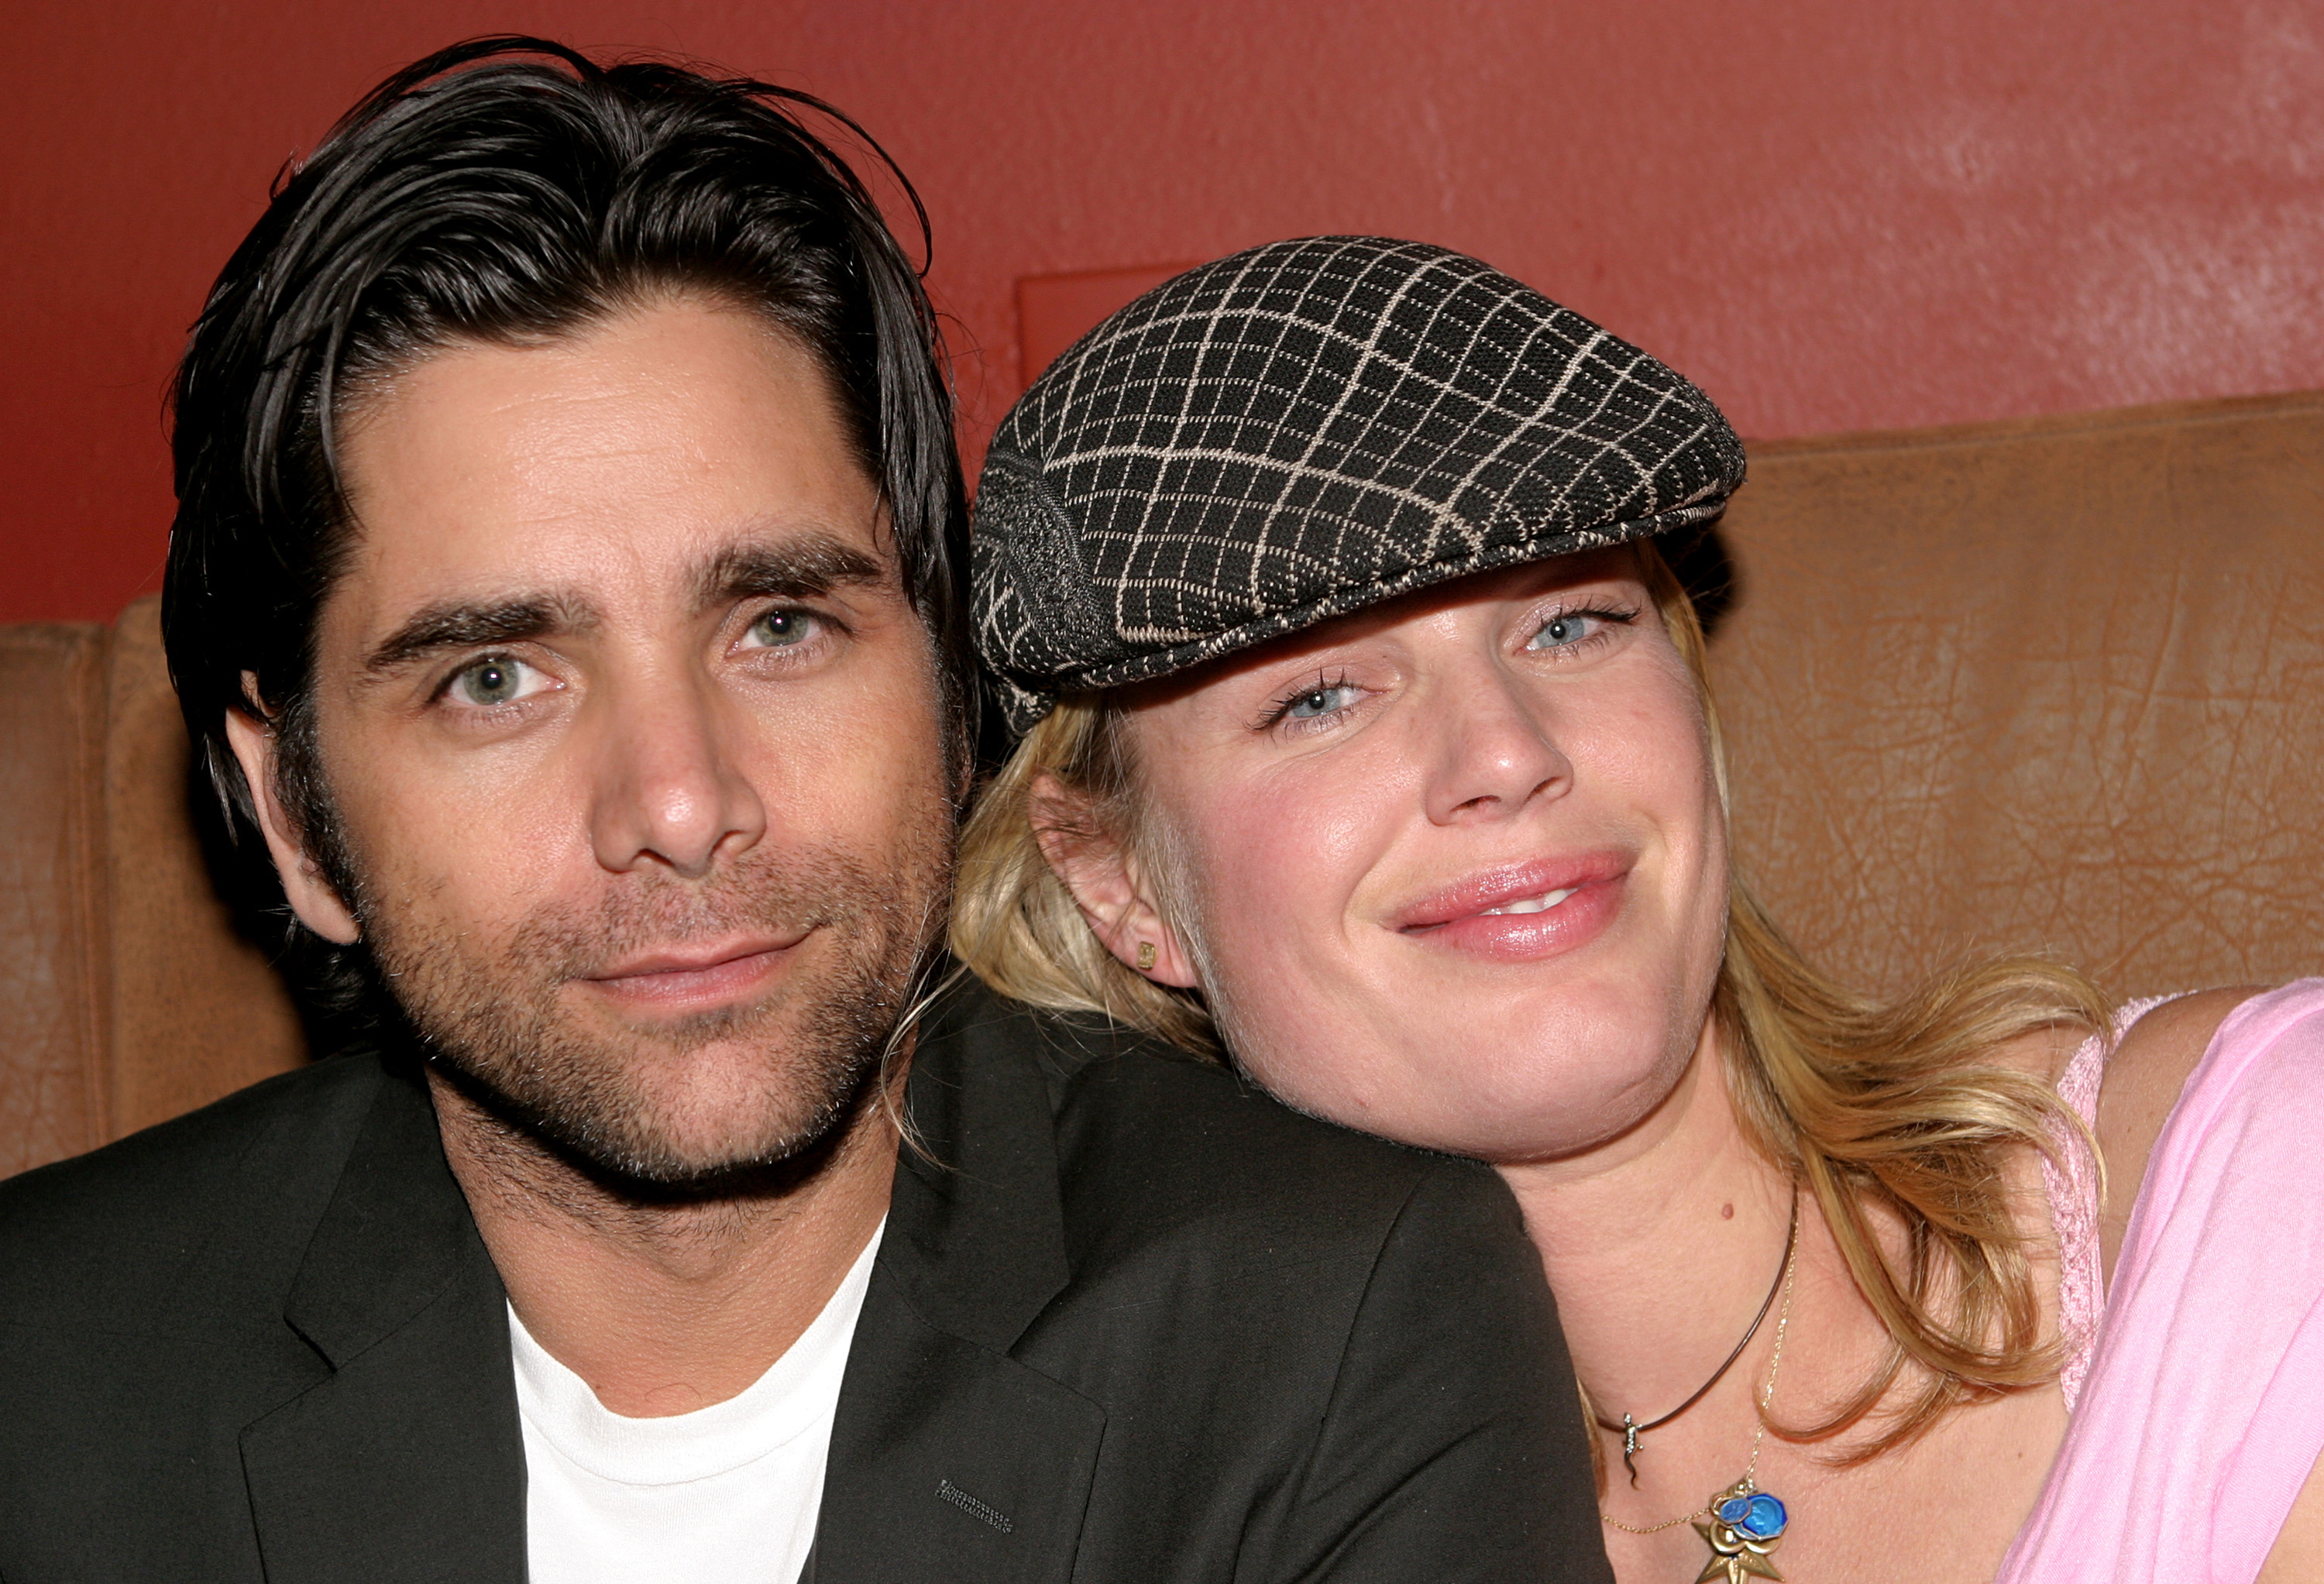 ohn Stamos and Rebecca Romijn attending the "Knots" premiere in Austin, Texas | Source: Getty Images